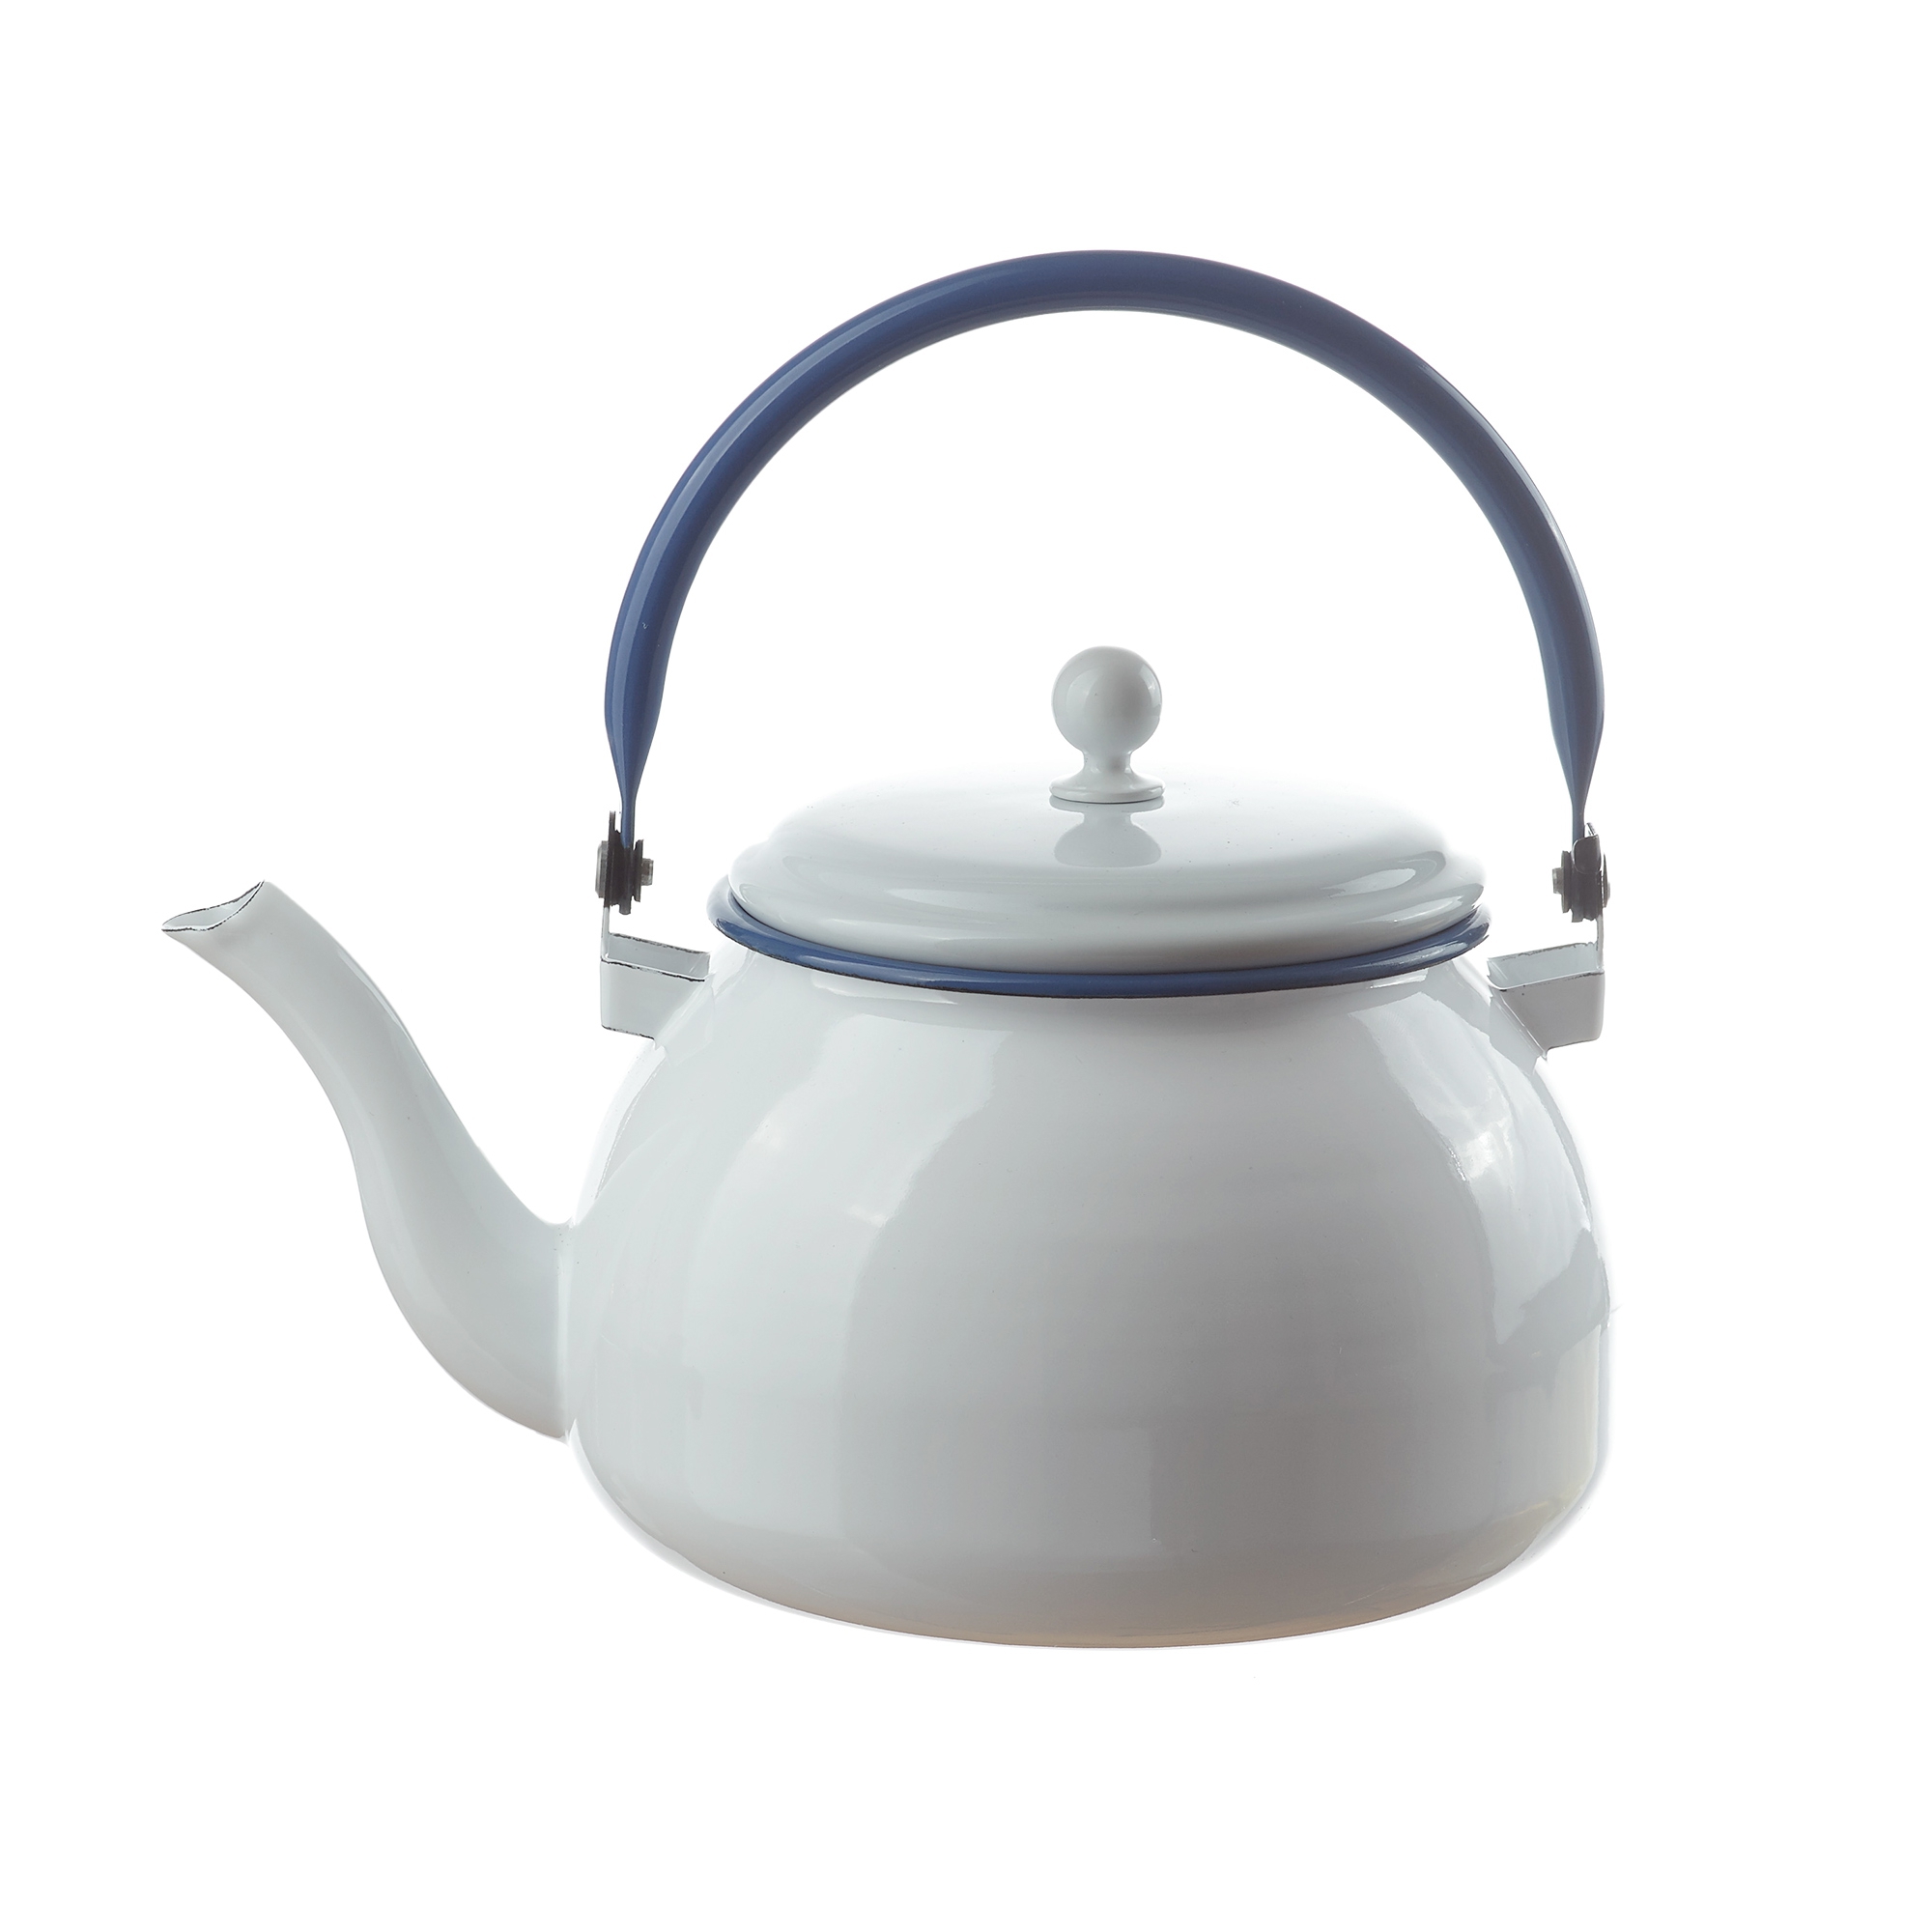 Münder Email - Kettle - White with blue rim and handle